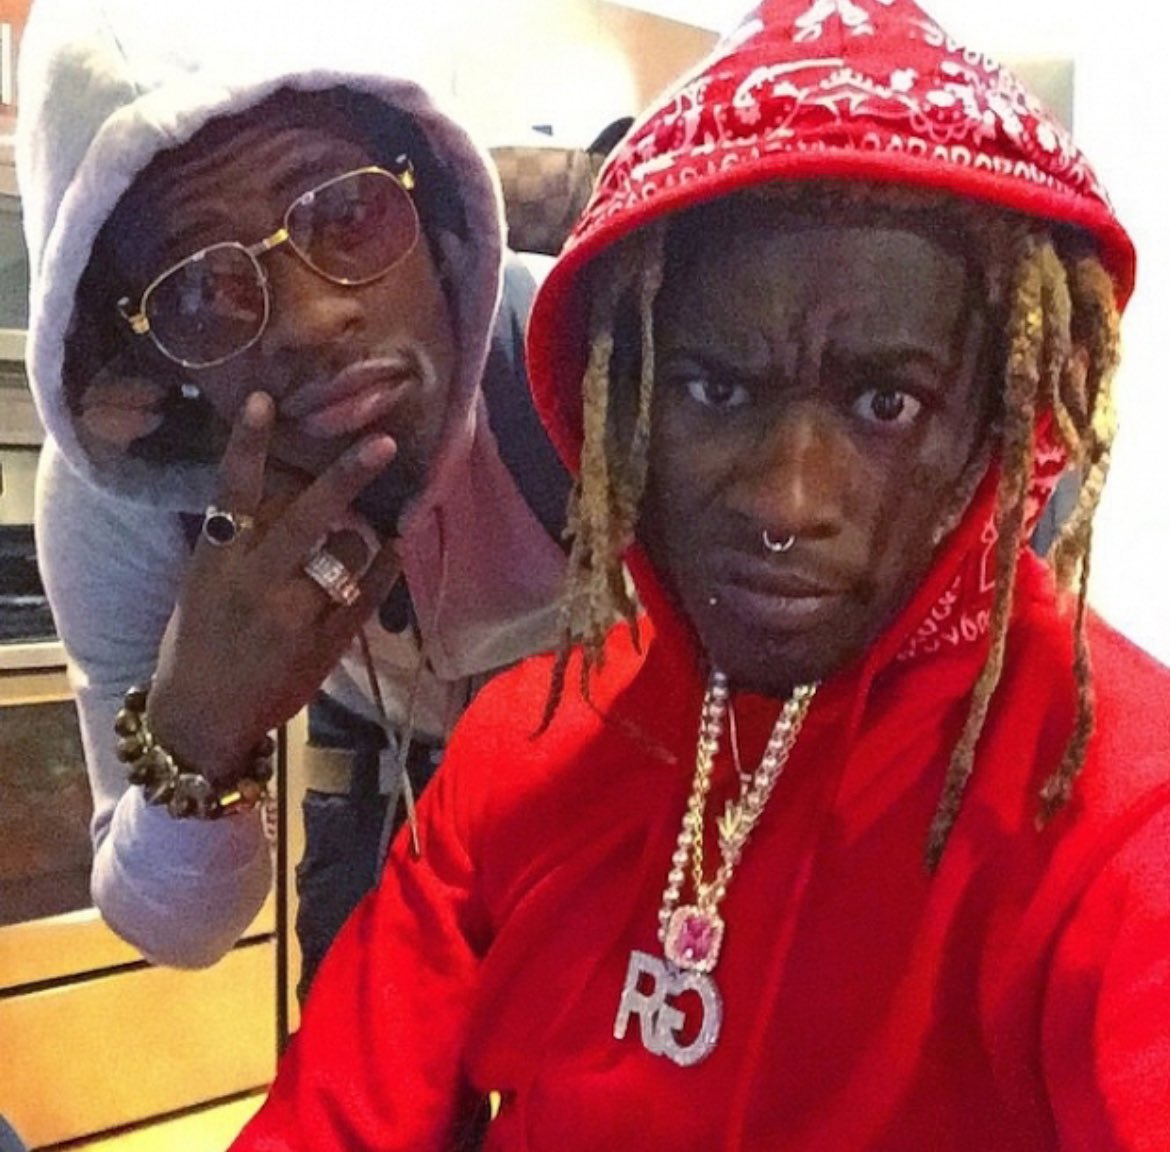 Rich Homie Quan has officially been subpoenaed by the State in the Young Thug RICO case. He is expected to take the stand in the upcoming few weeks and this does NOT mean he cooperated or will cooperate.